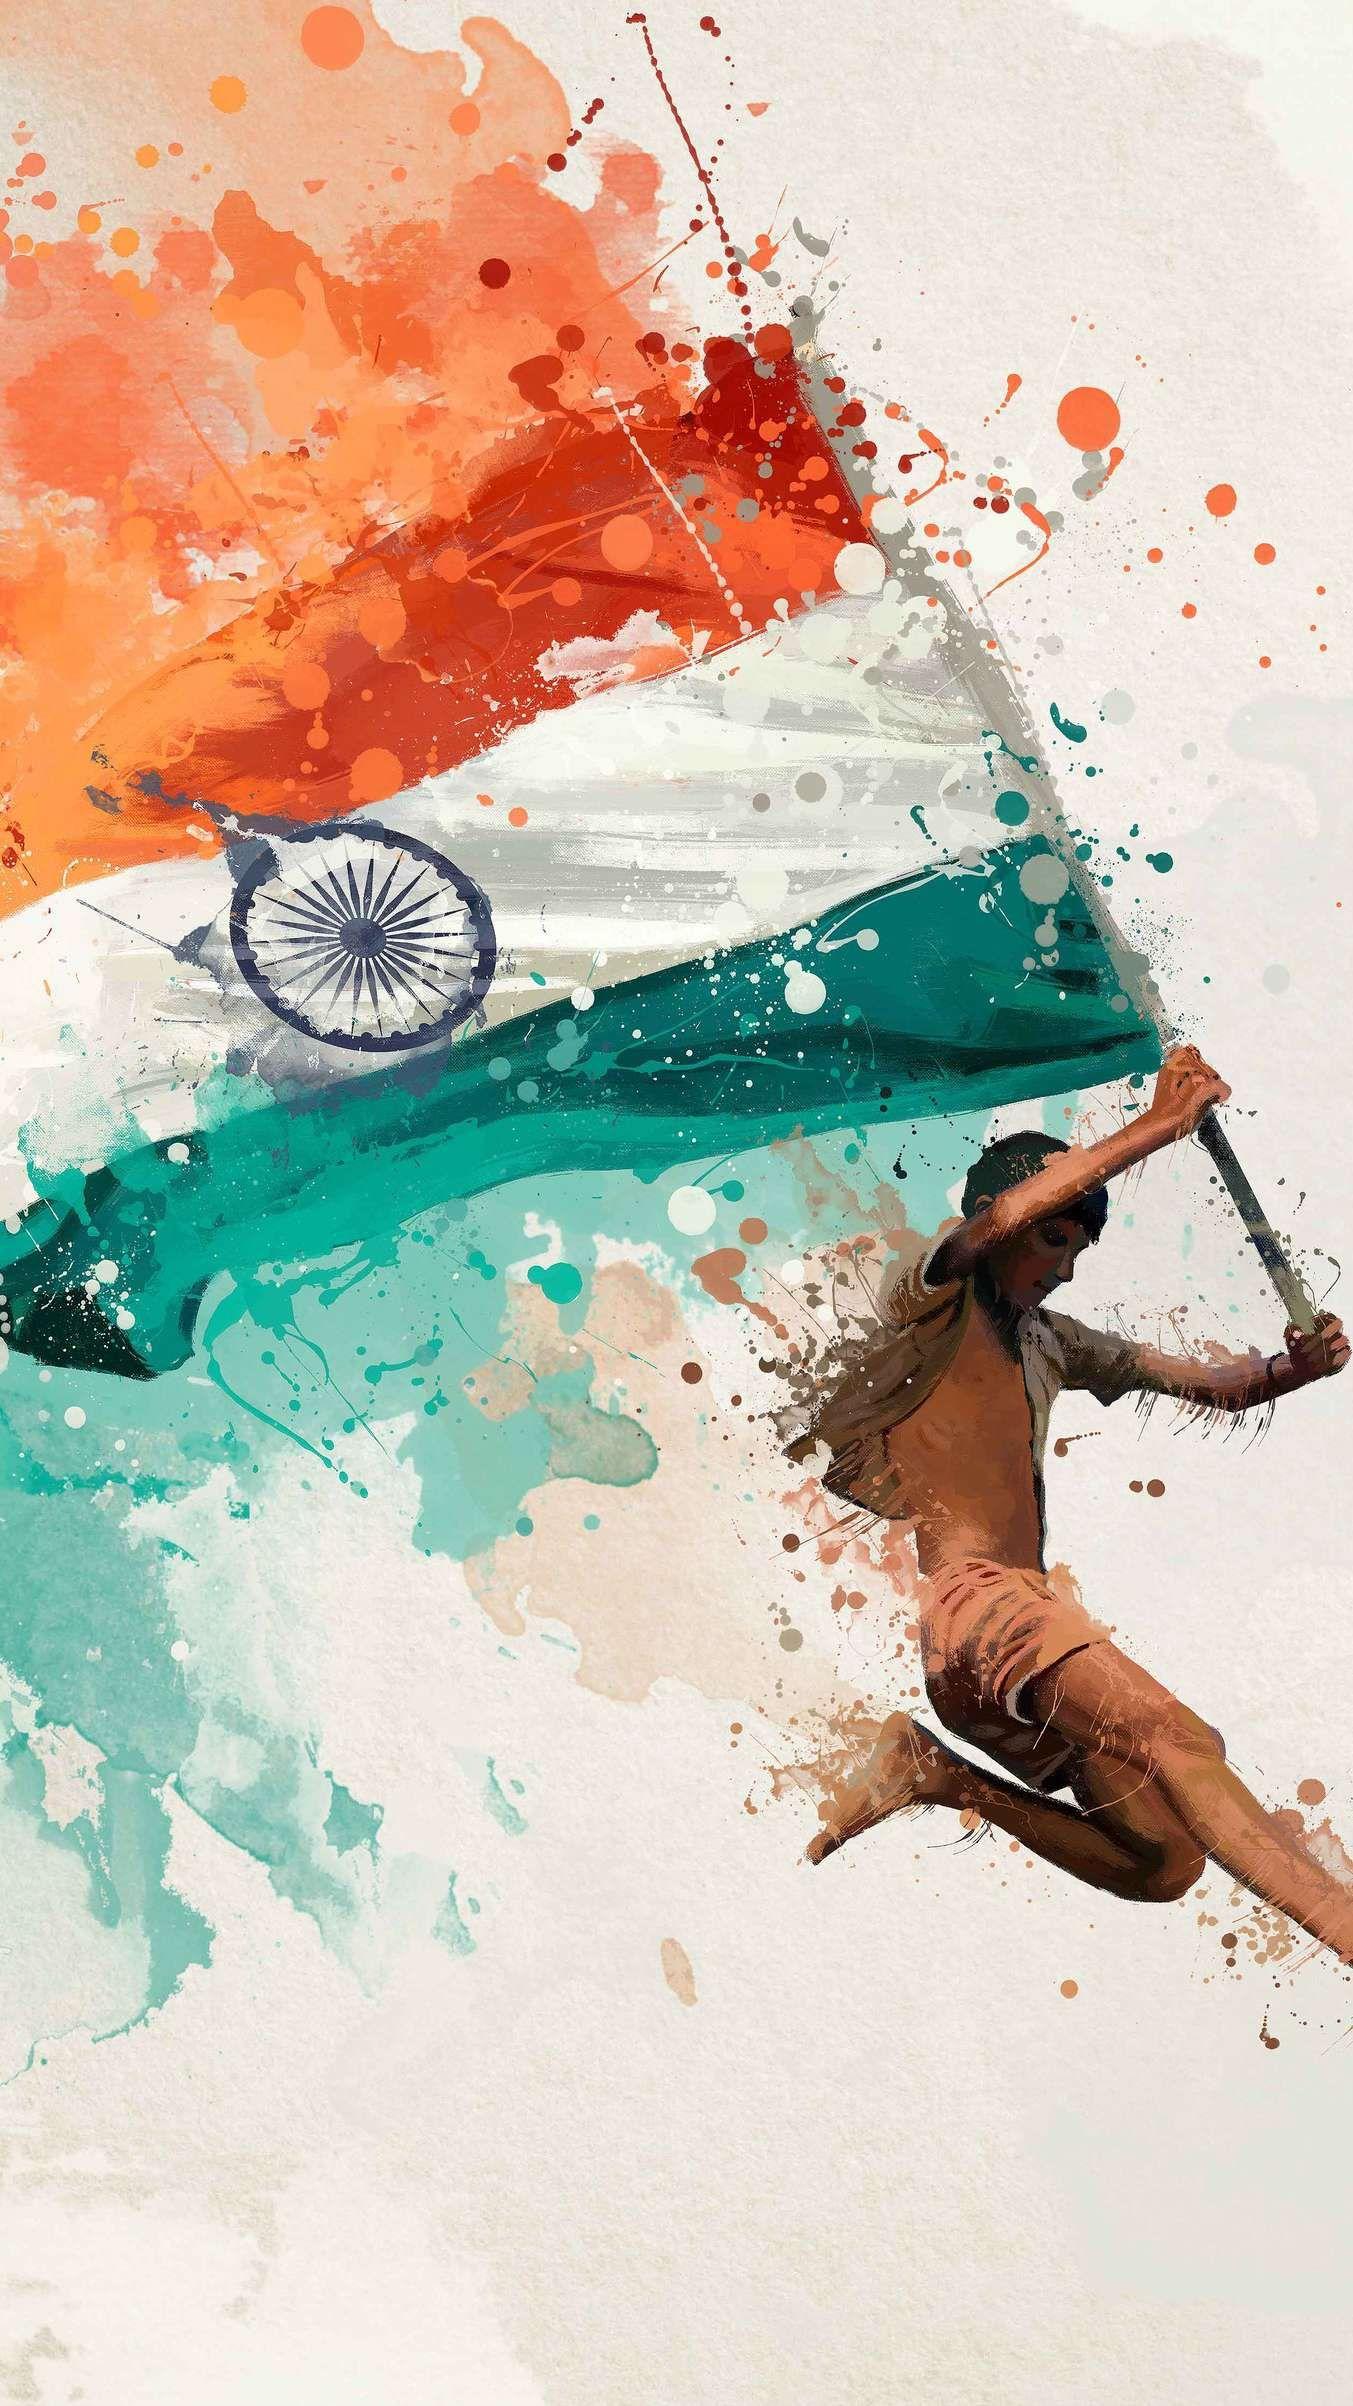 India Flag Hd Iphone Wallpapers Wallpaper Cave